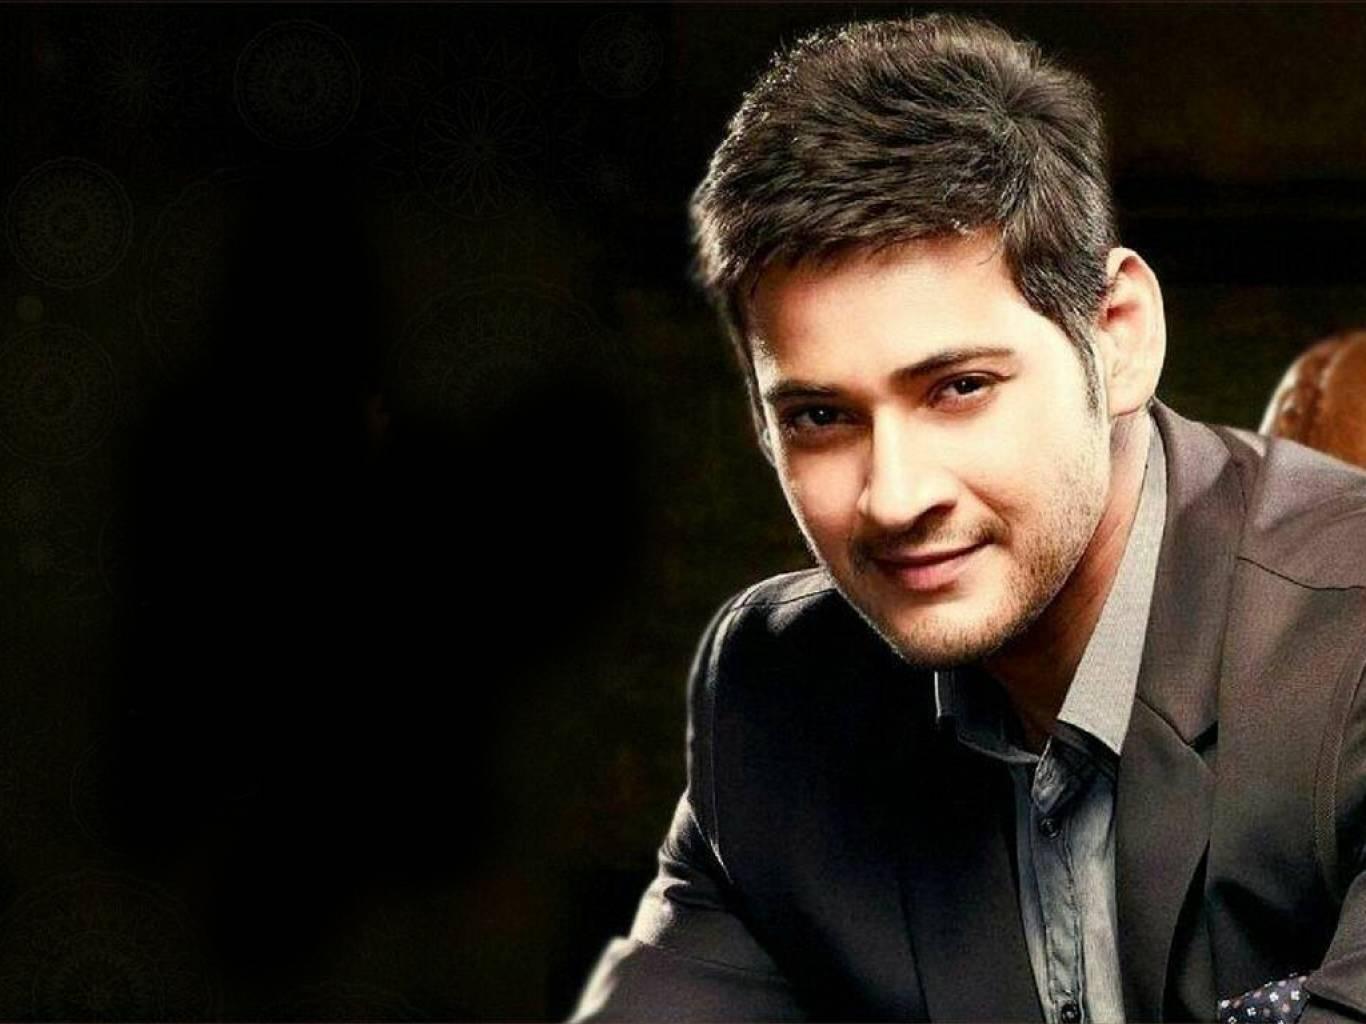 Mahesh Babu Hd Wallpapers Wallpaper Cave Mahesh babu has a great physique, can sing and can dance and at times can have a rather campness about him, which have all led to people asking the question, 'is mahesh babu gay?' and in some cases people simply accusing him of being gay. mahesh babu hd wallpapers wallpaper cave